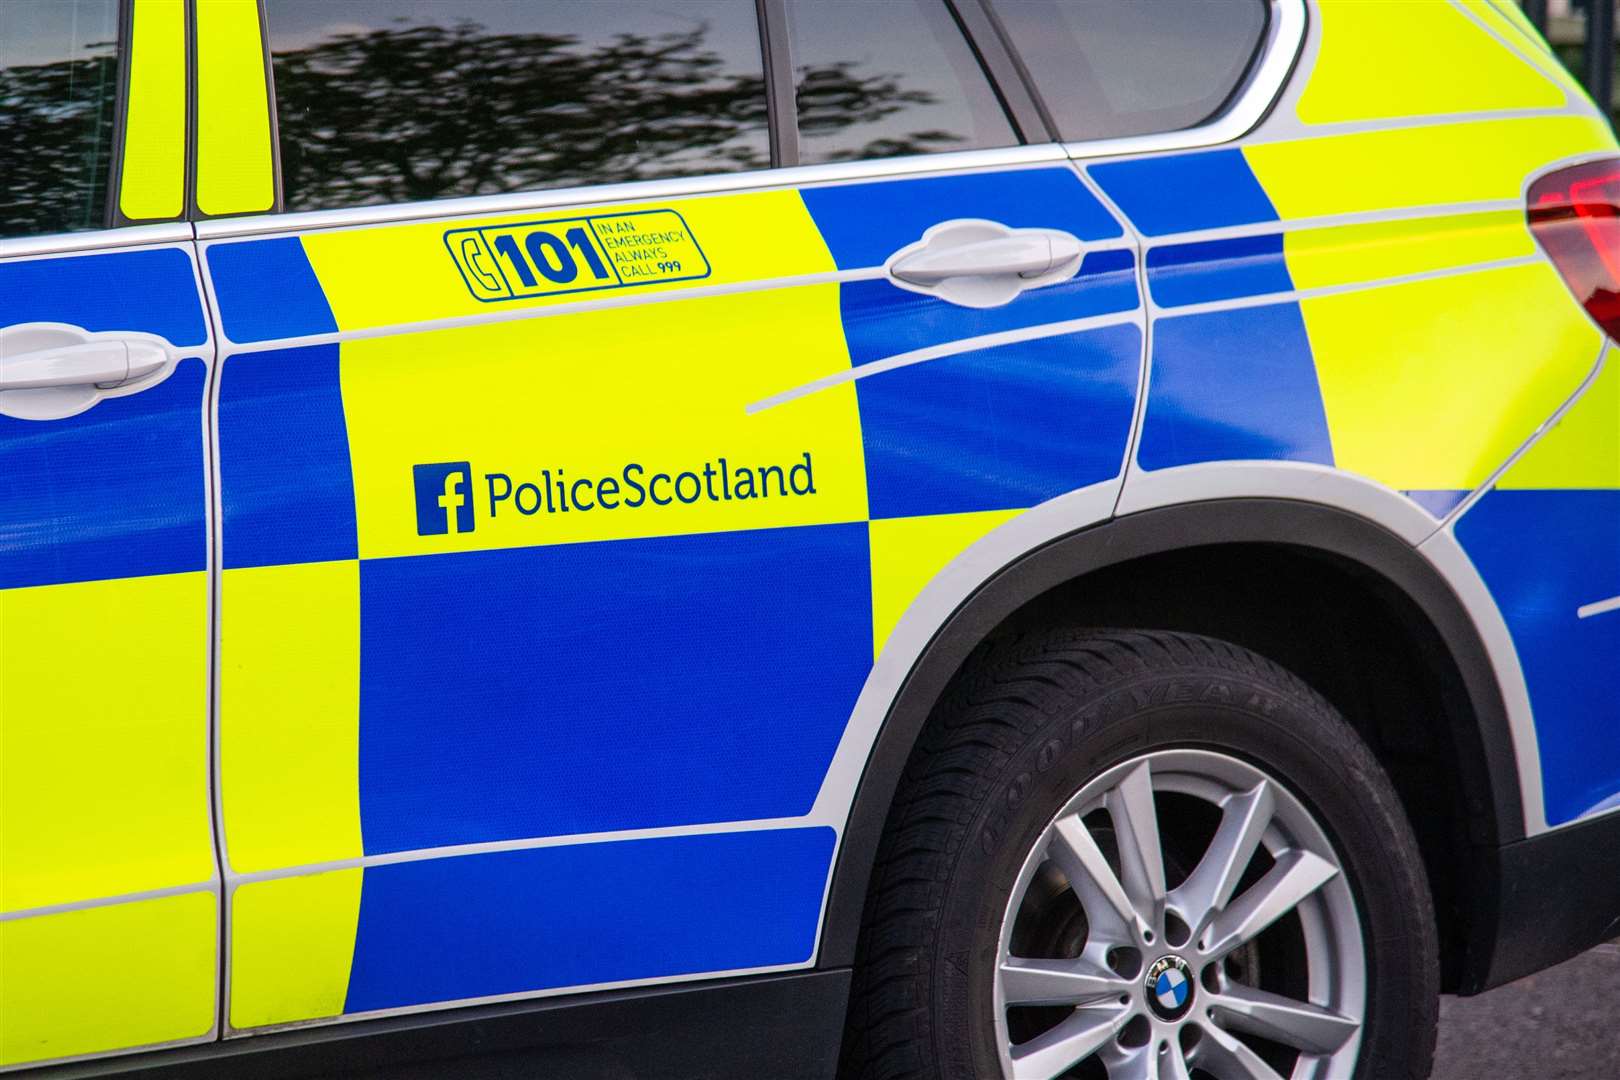 Police said a man had been charged in connection with a road traffic offence (file image). Picture: Highland News & Media.